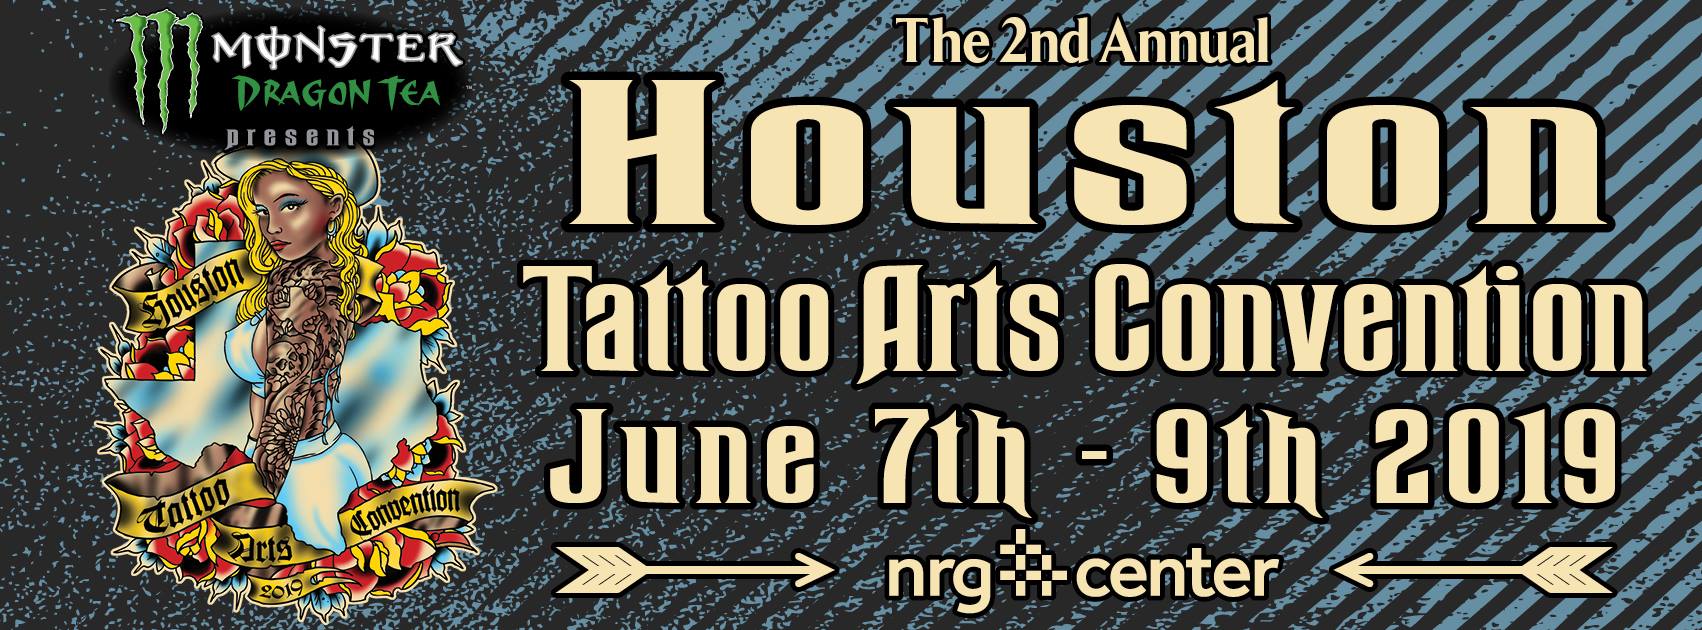 Hollis Cantrell on Twitter I will be at the villainarts tattoo convention  in Houston Texas this FridaySunday June 4th6th If you are interested  in getting a tattoo contact me at hollisiconictattoocom as